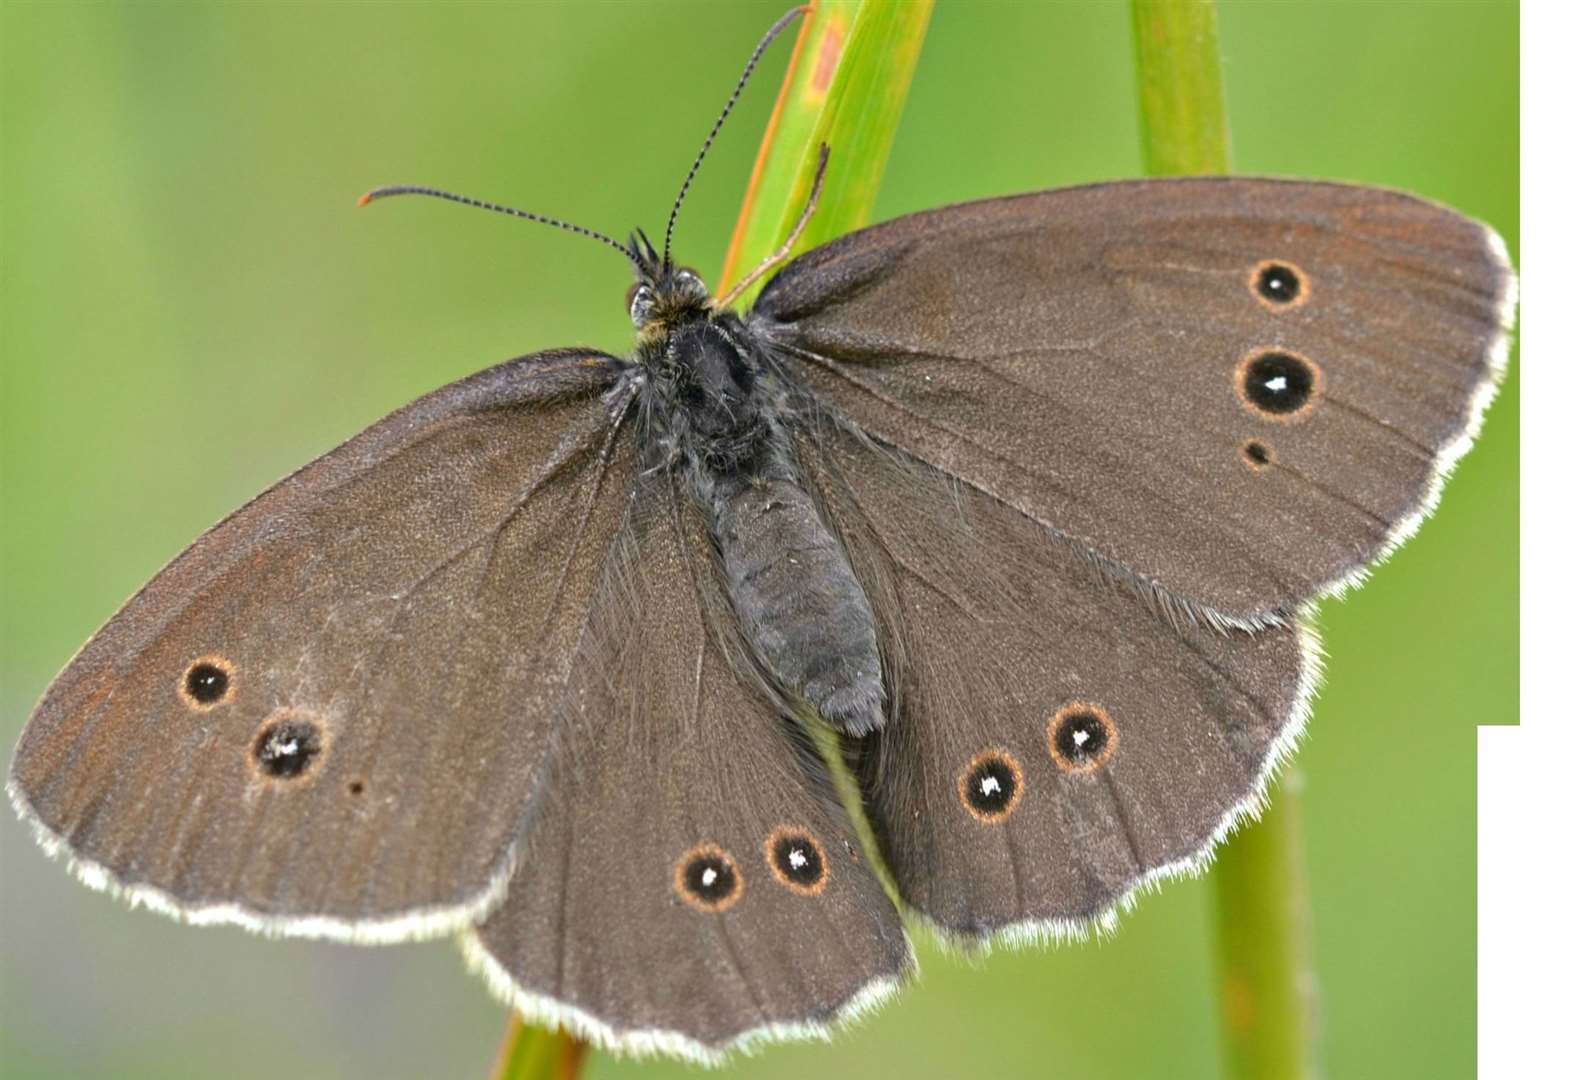 The ringlet butterfly